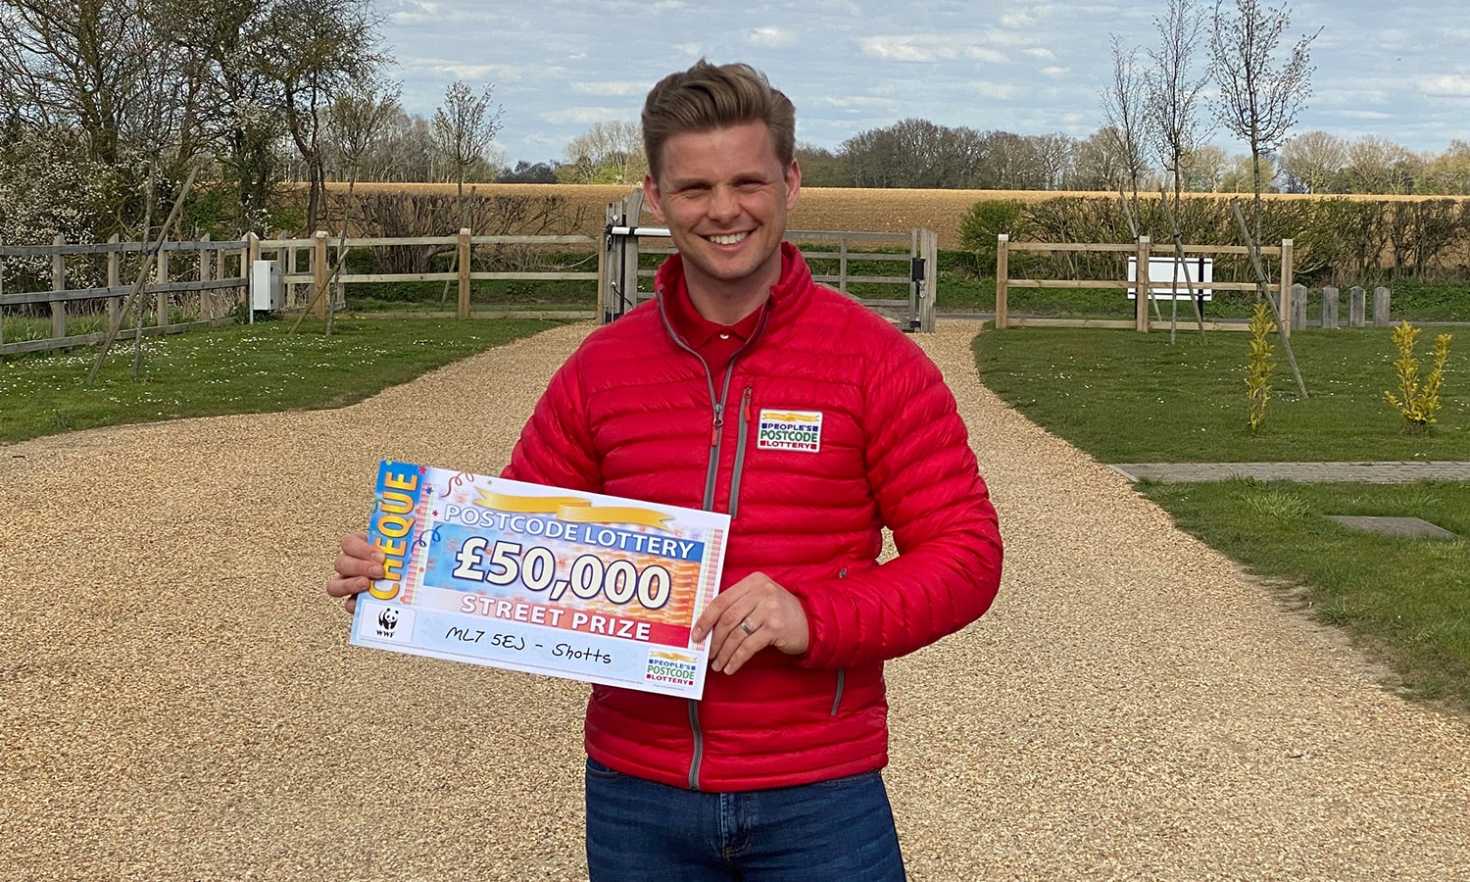 Street Prize Presenter Jeff Brazier reveals the winning postcode for our £50,000 Street Prize